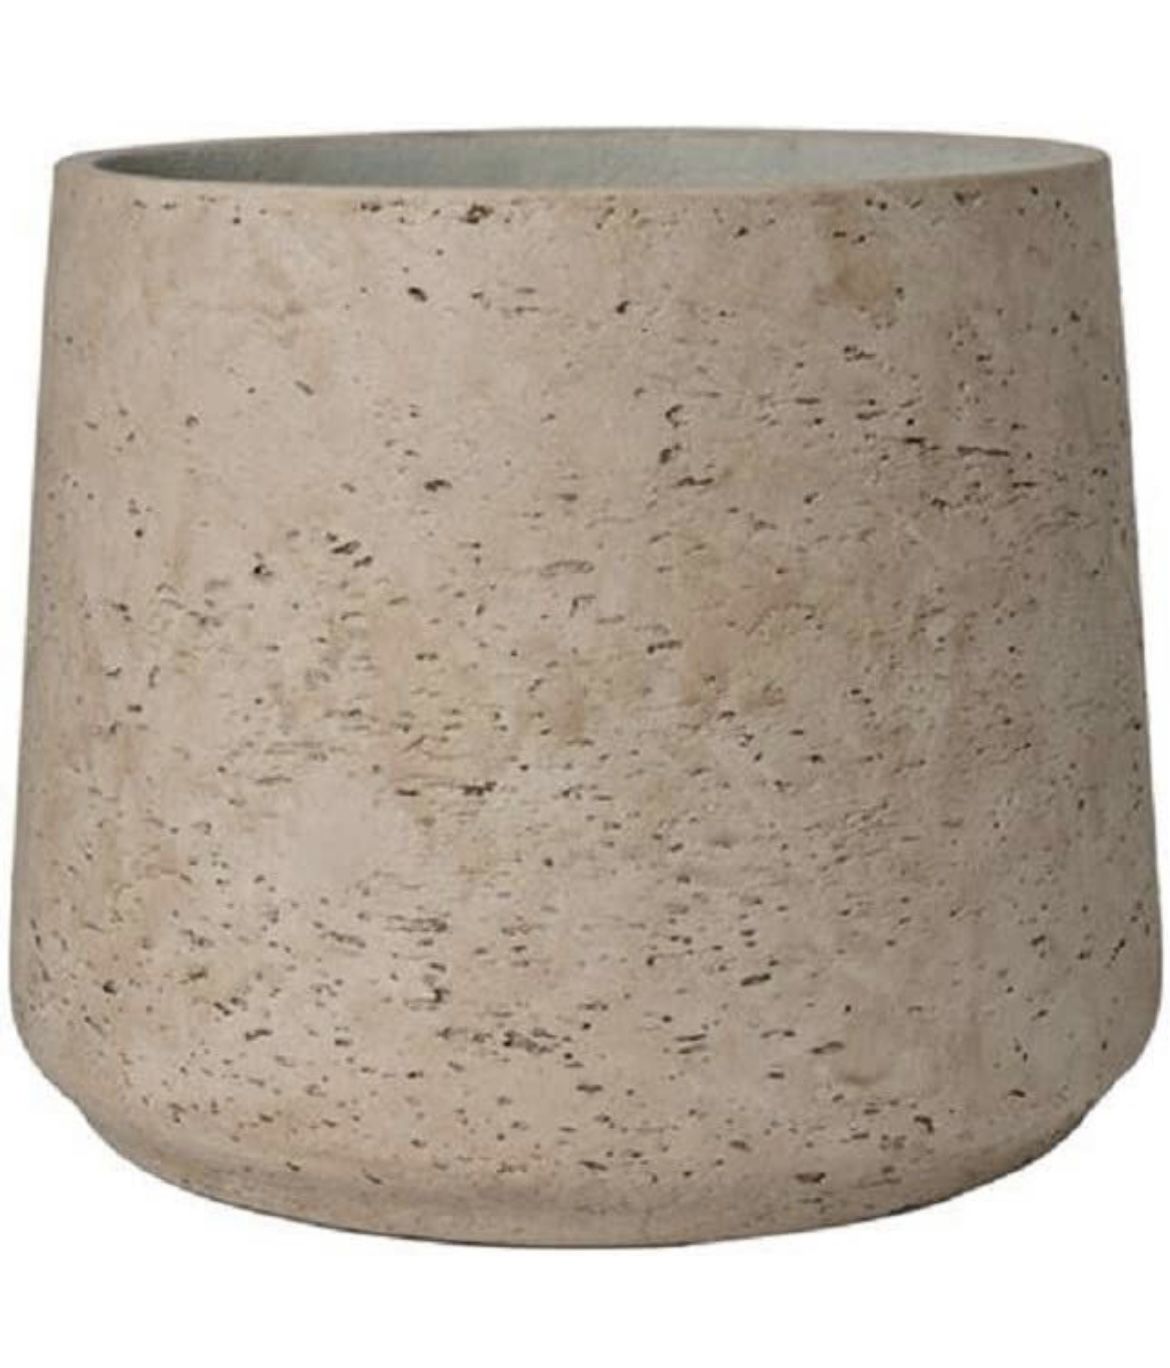 B-13 Pottery Pots Petite Grey Planter 6" H x 7" - Gray Washed Fiberstone Indoor and Outdoor Flower Pot